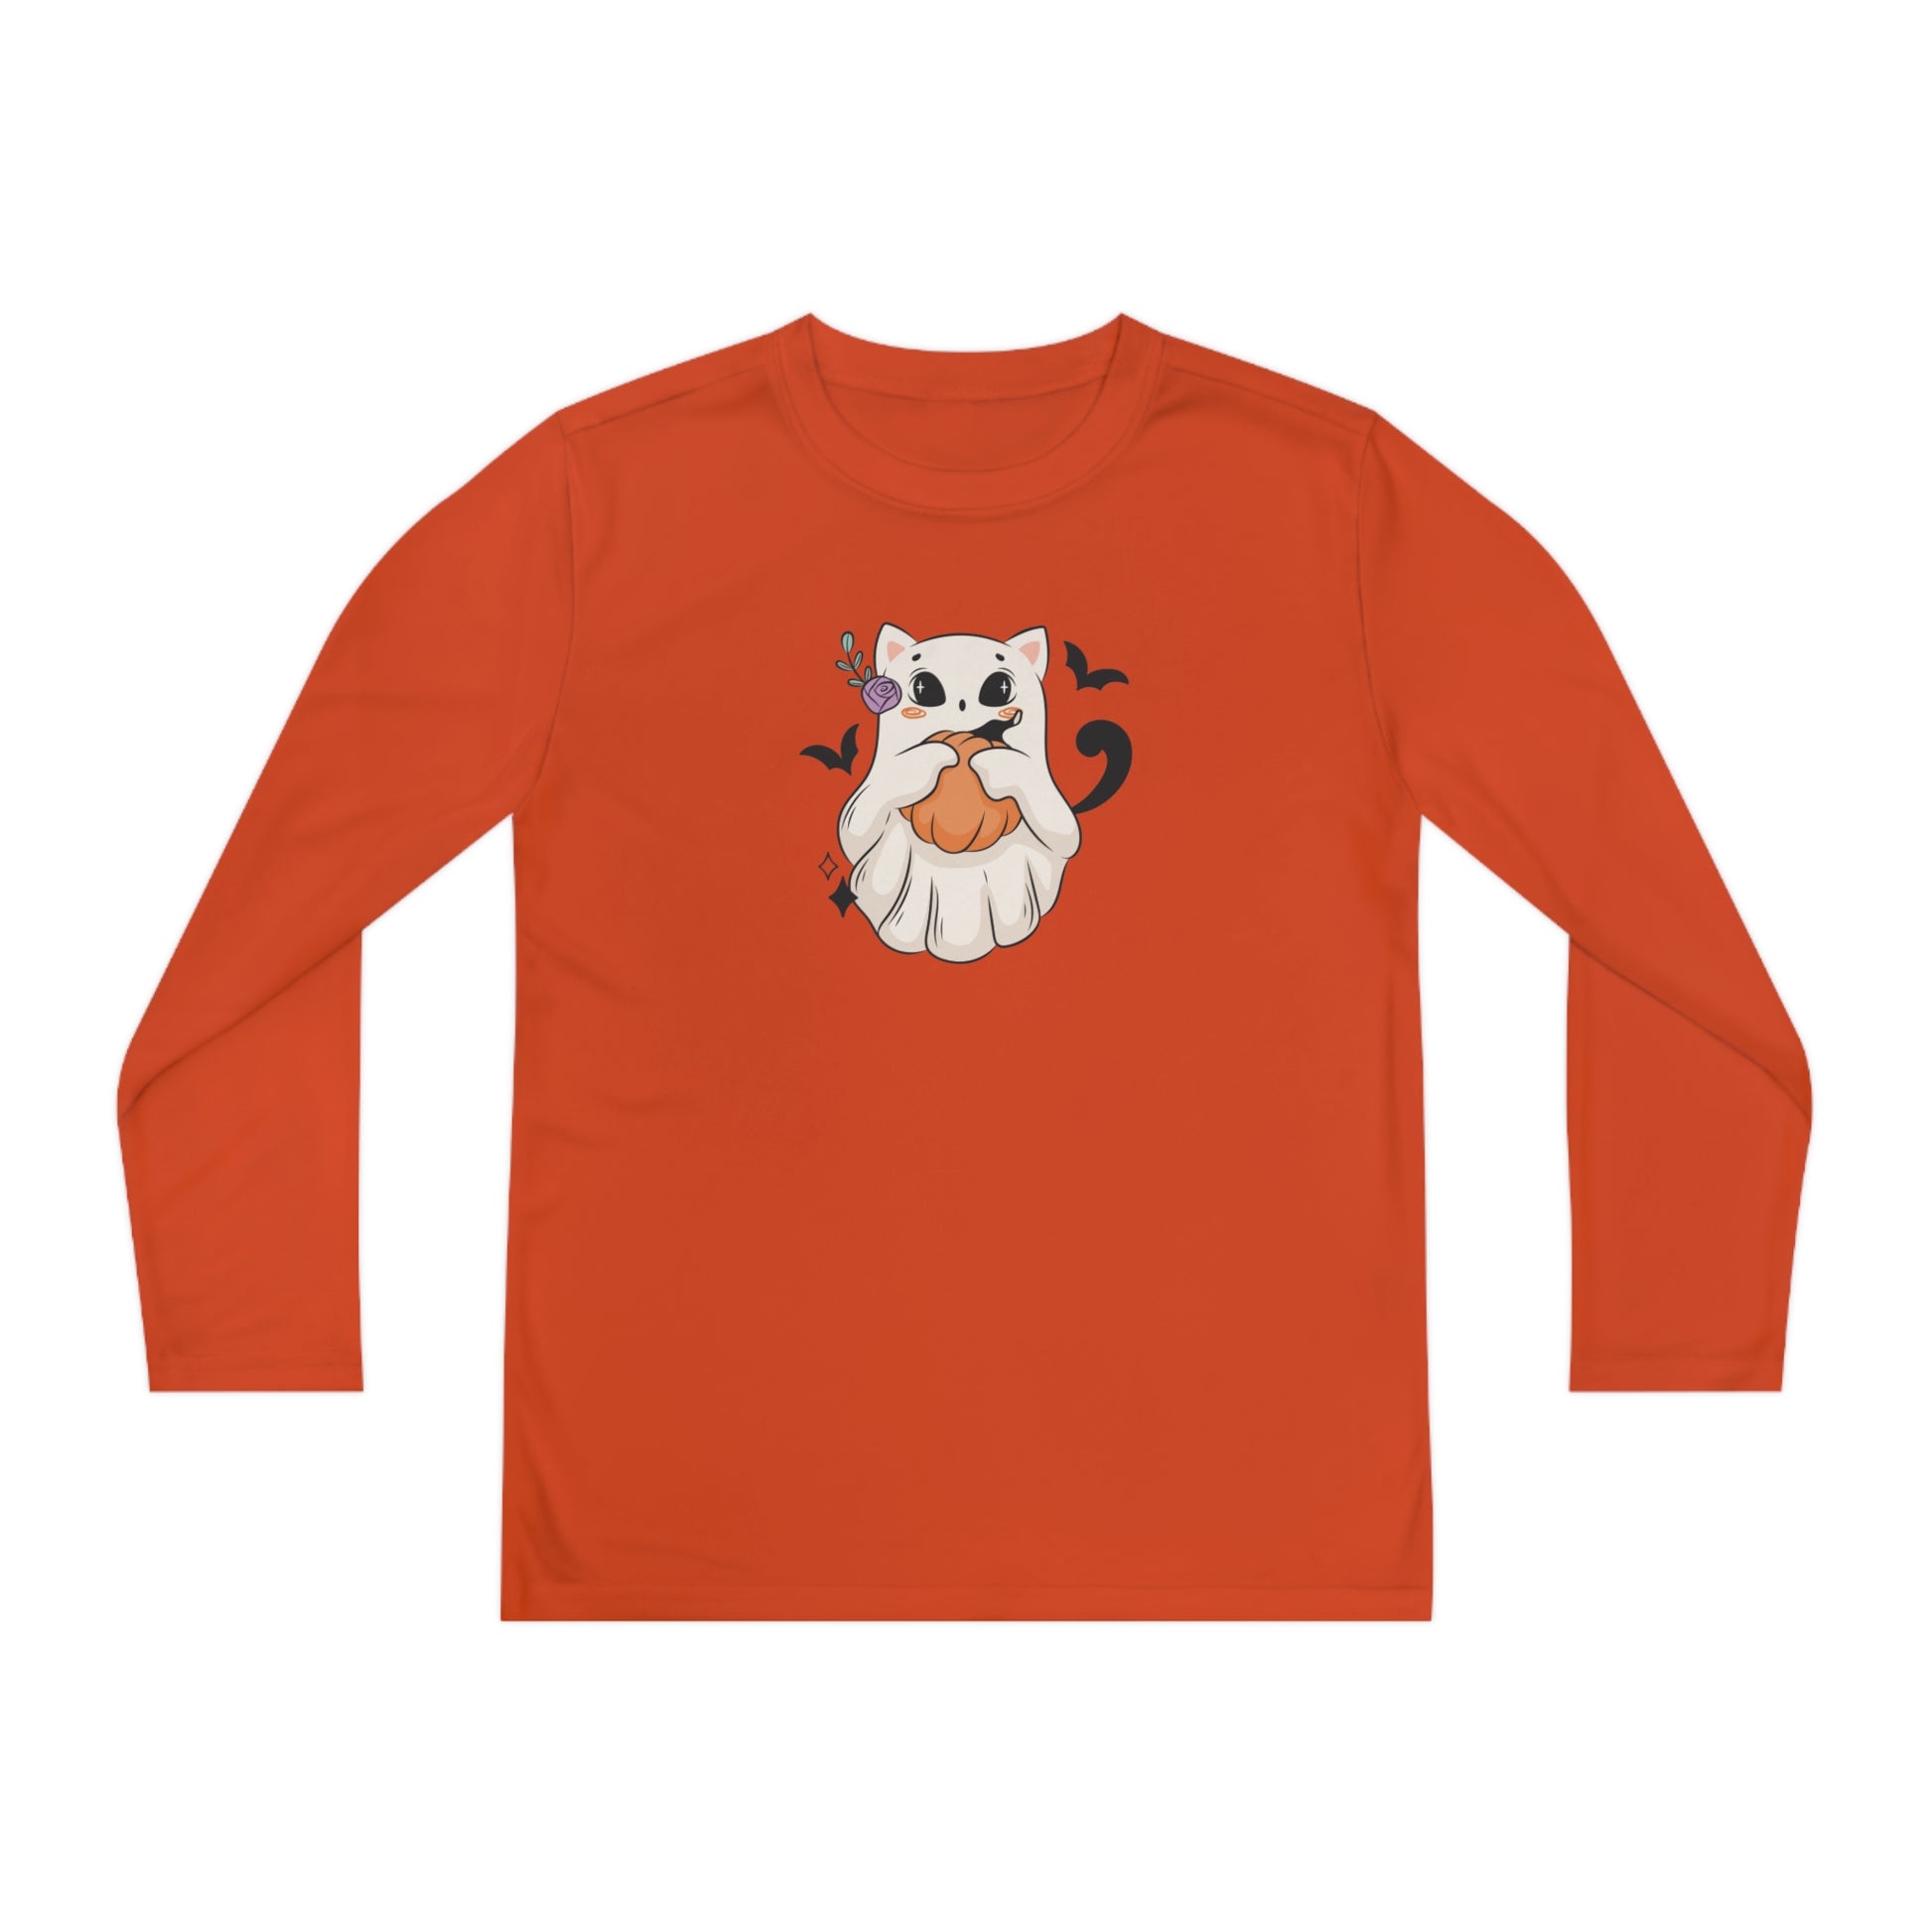 Sweet Kitty Ghost Youth Long Sleeve Competitor Tee - Kids clothes - Epileptic Al’s Shop